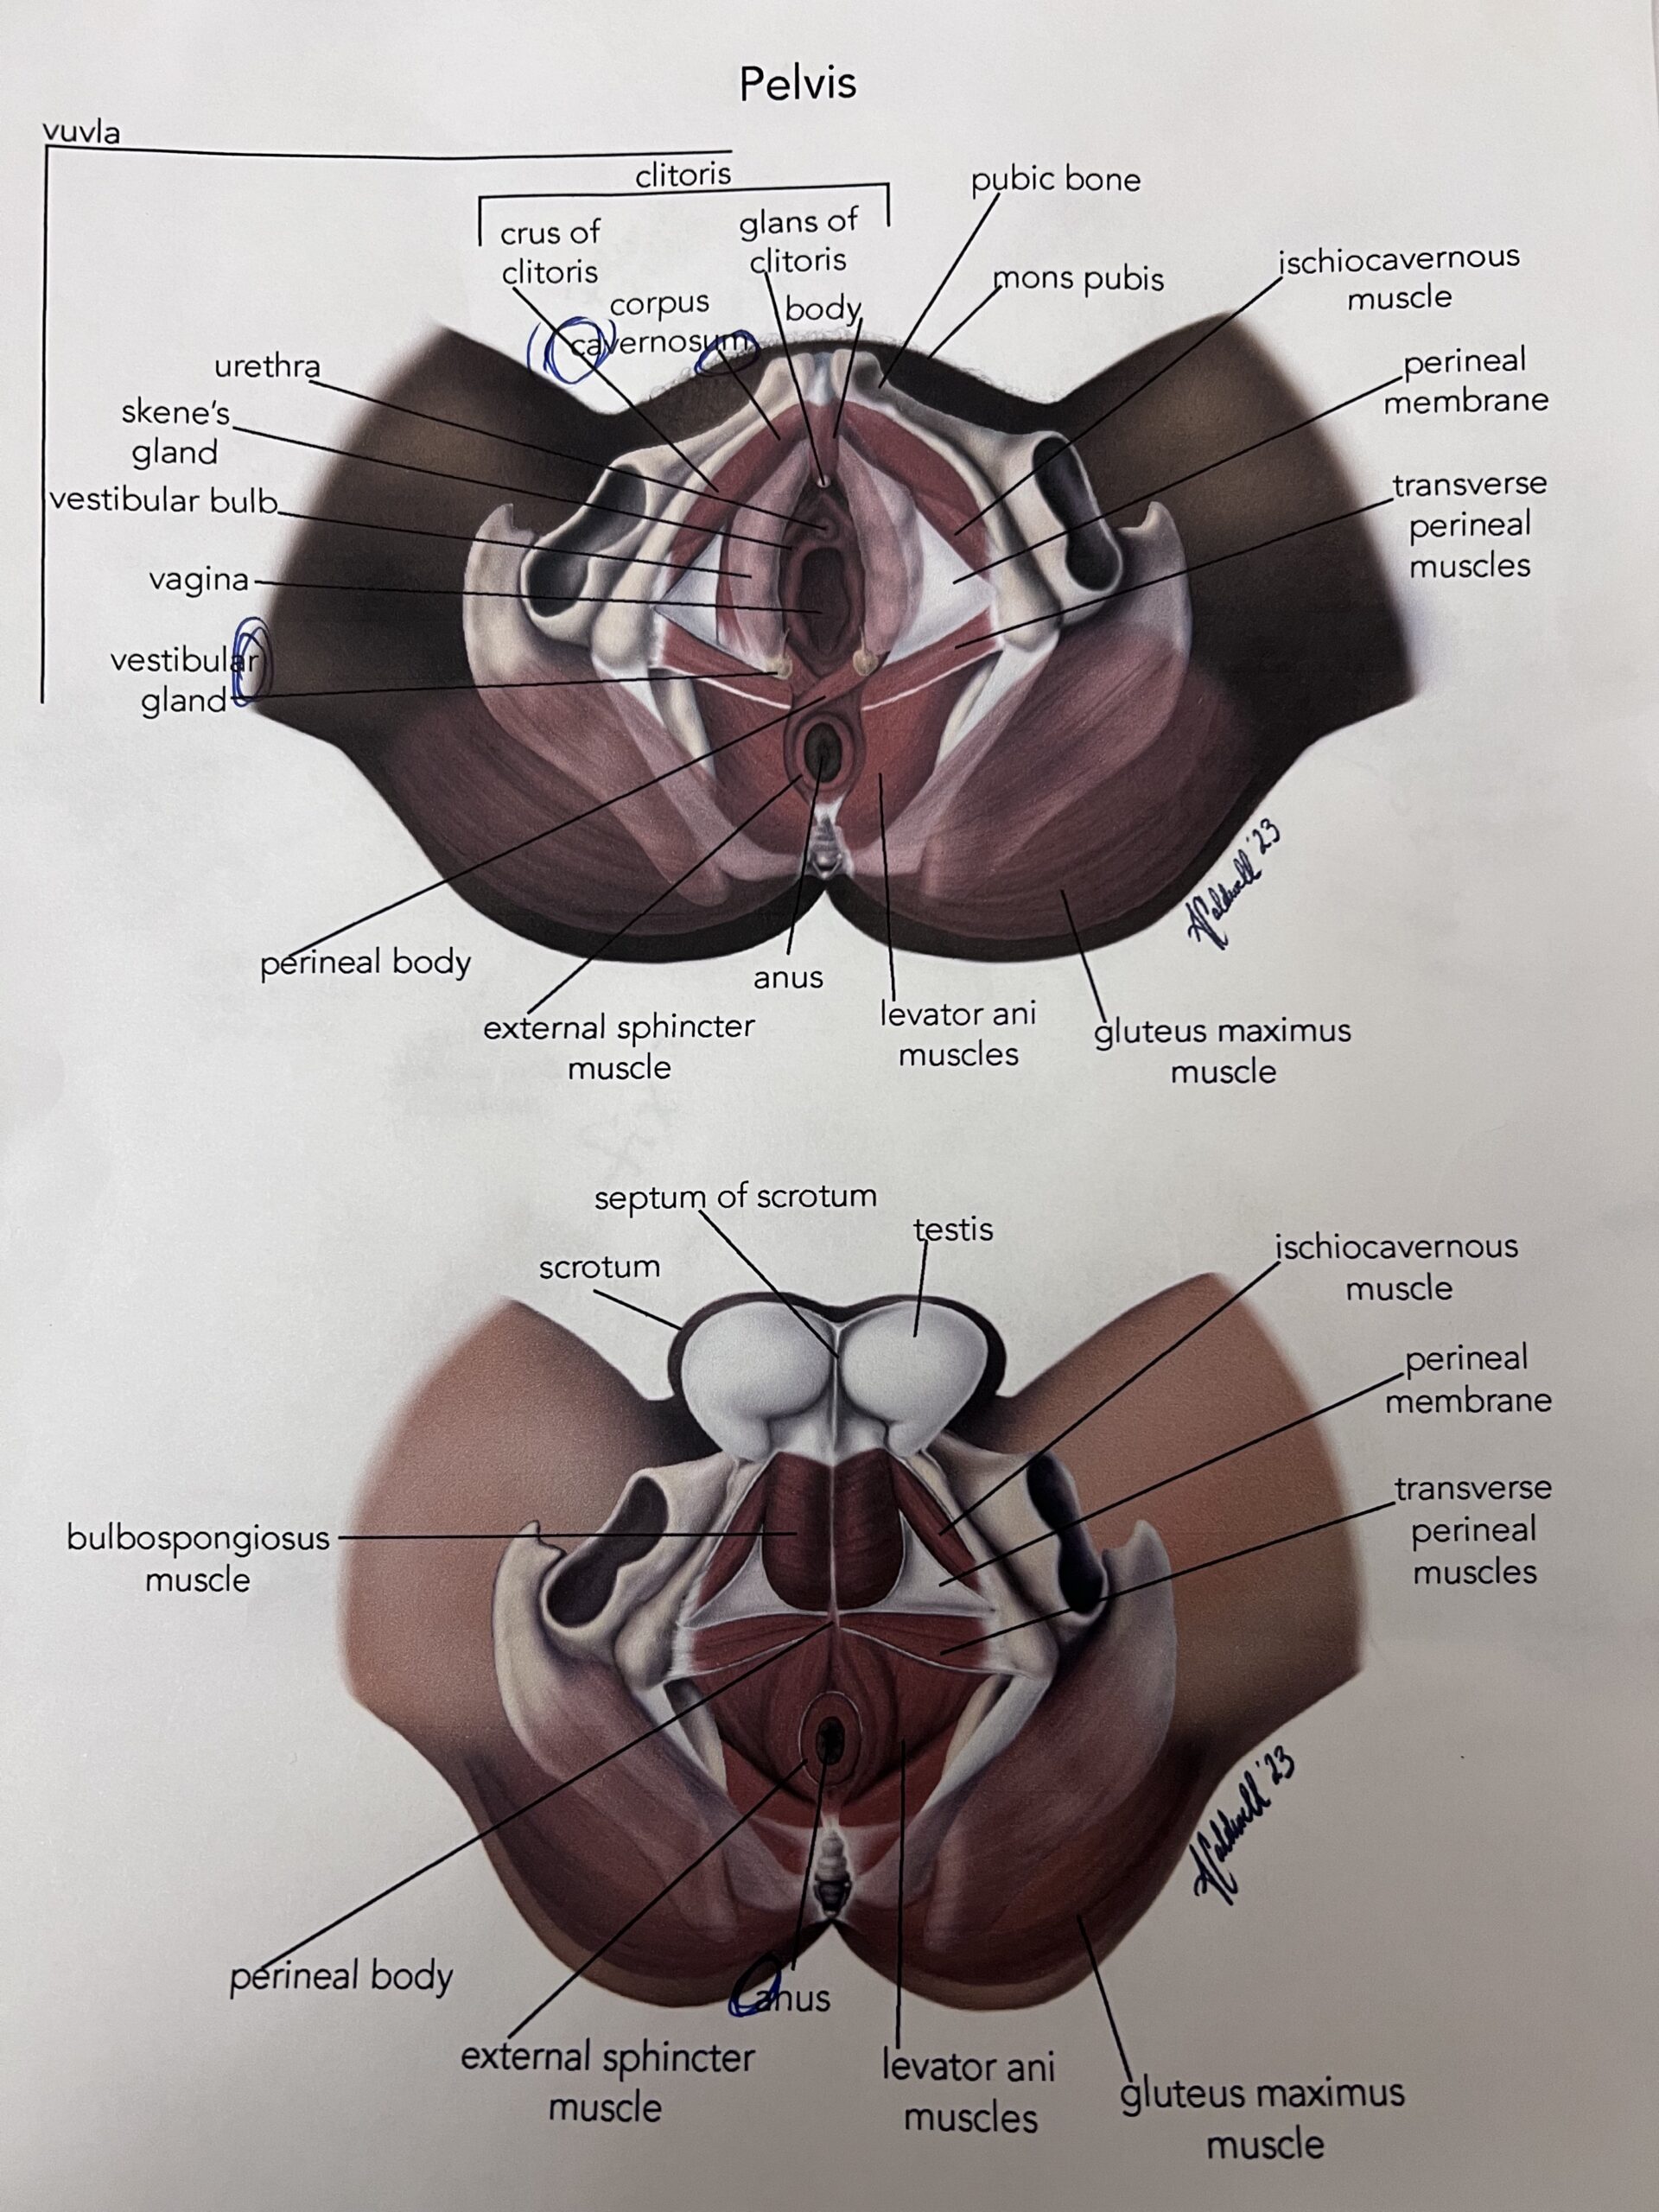 In progress Illustration of the male and female pelvic floors.